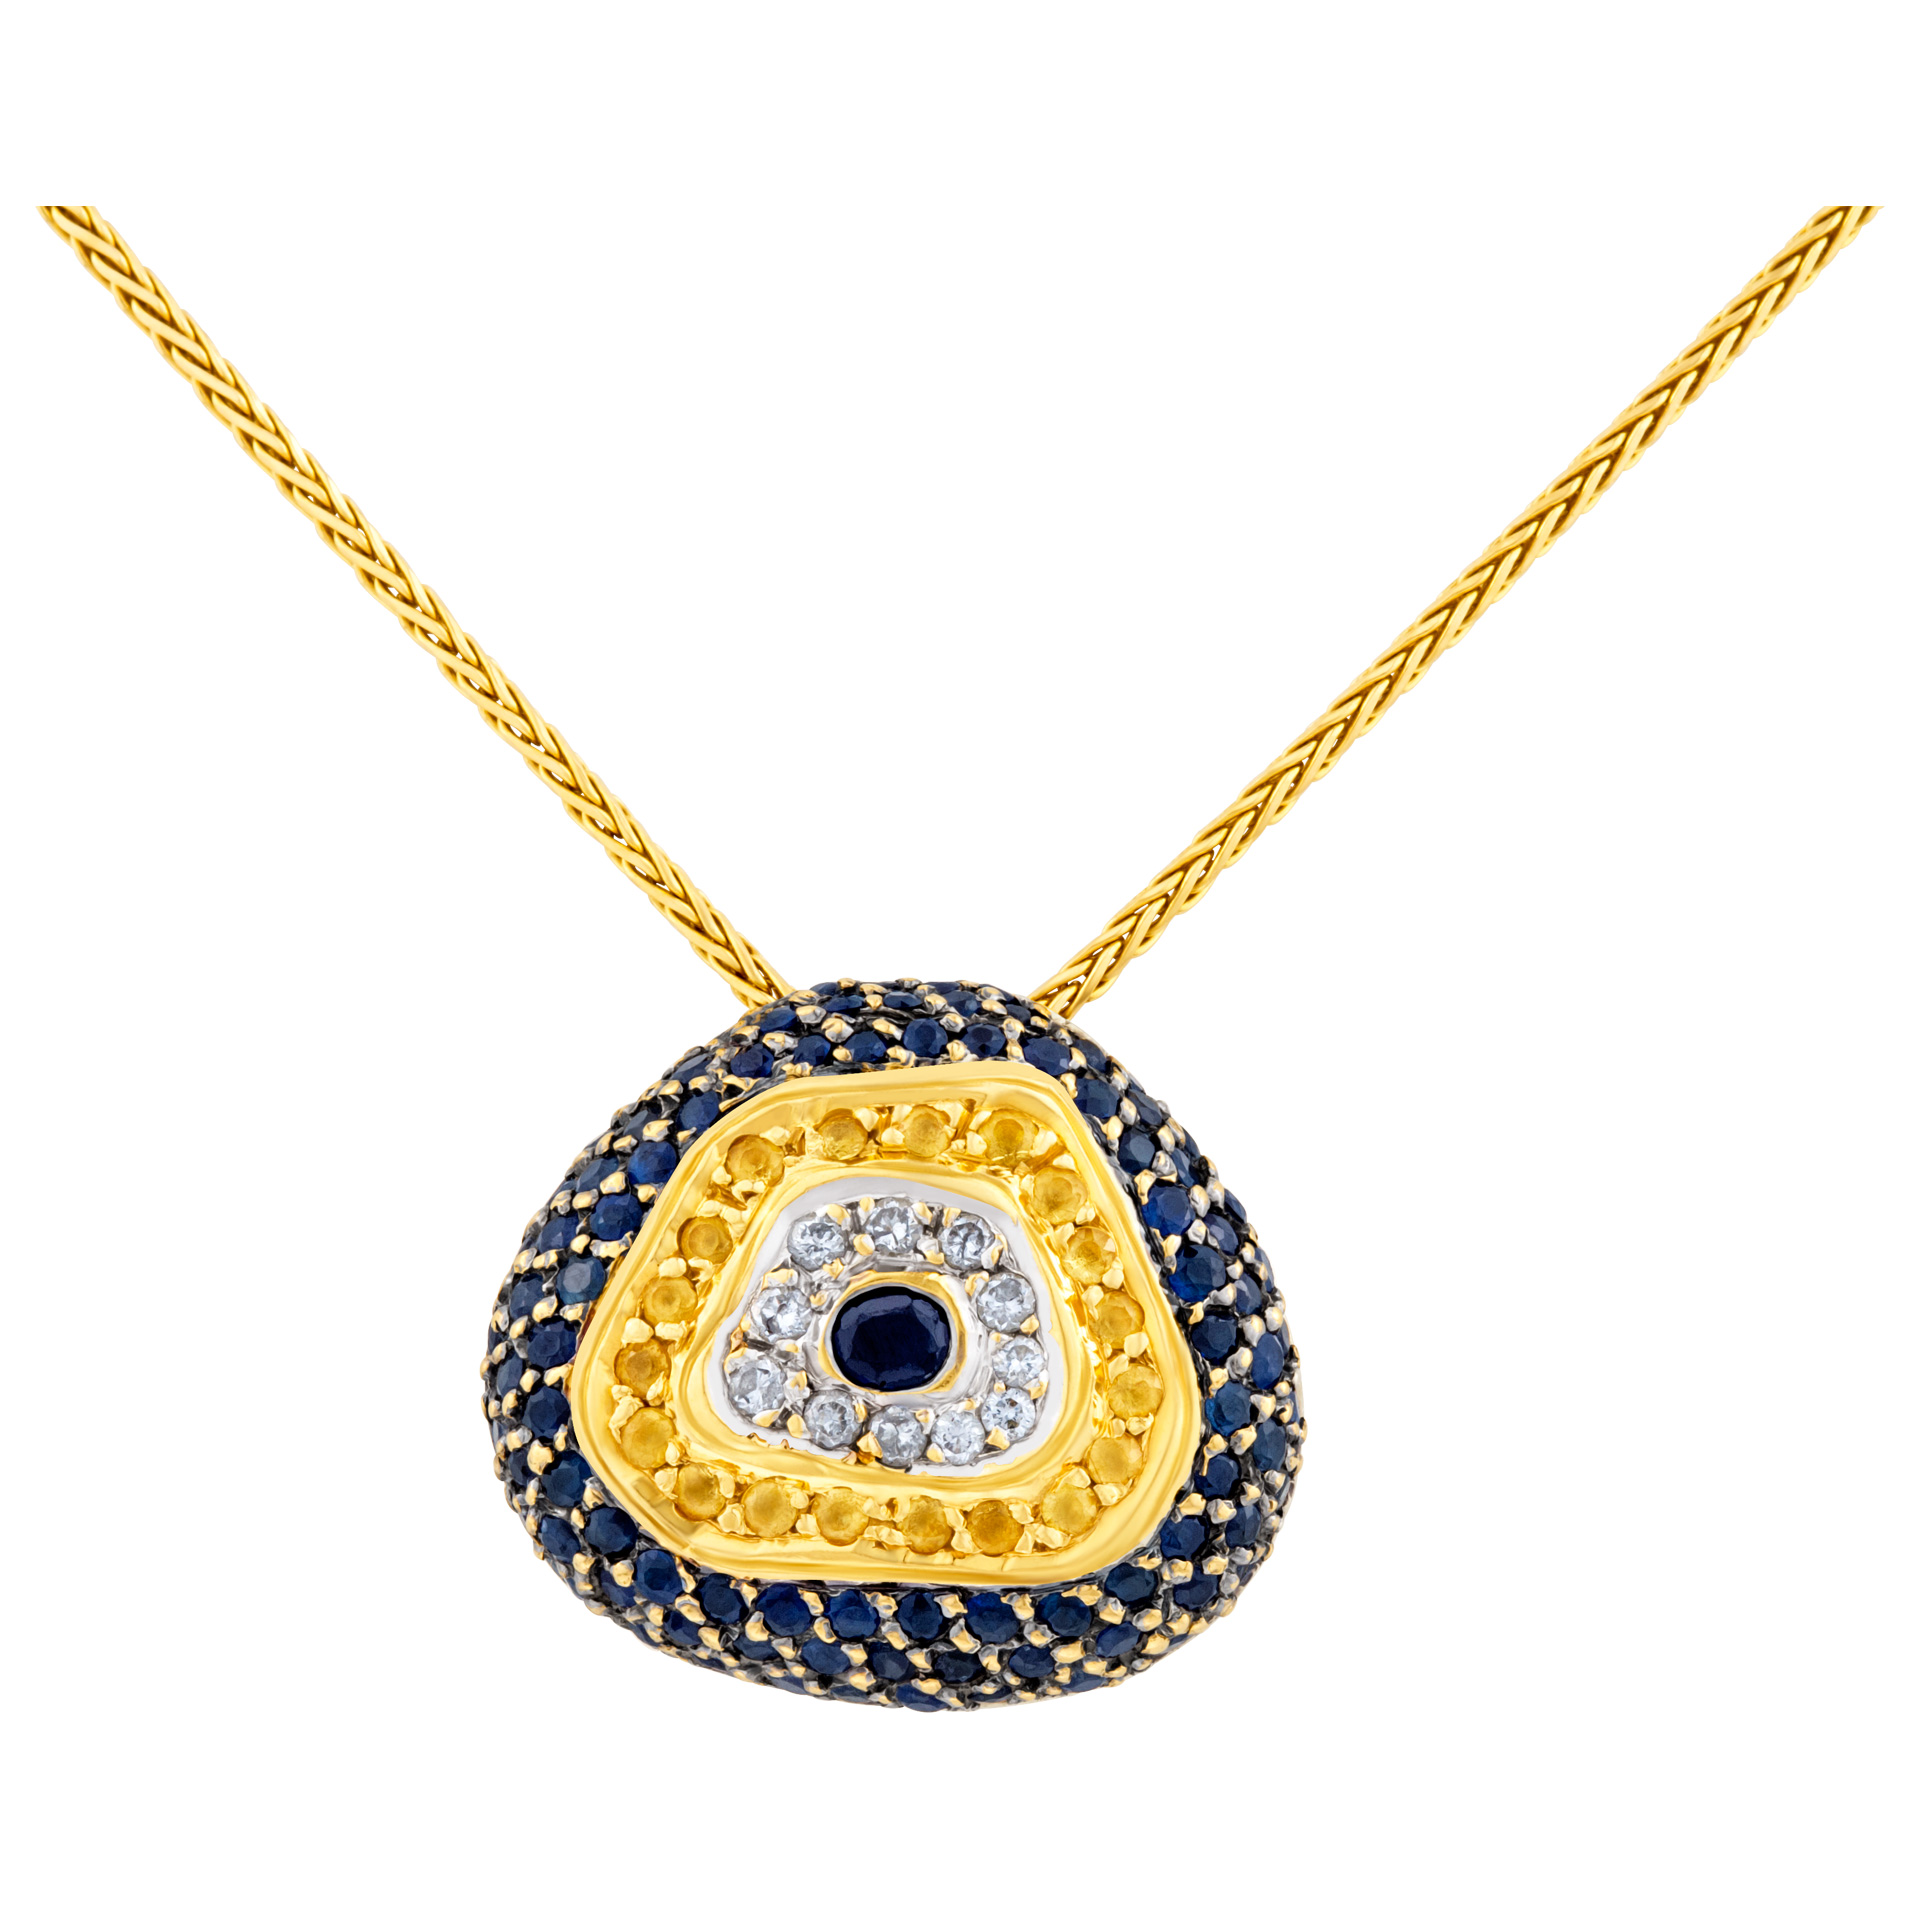 Blue & yellow sapphire and diamond pendant. 4.00 carats in colorful sapphires and approx 0.50 carats in diamonds image 1